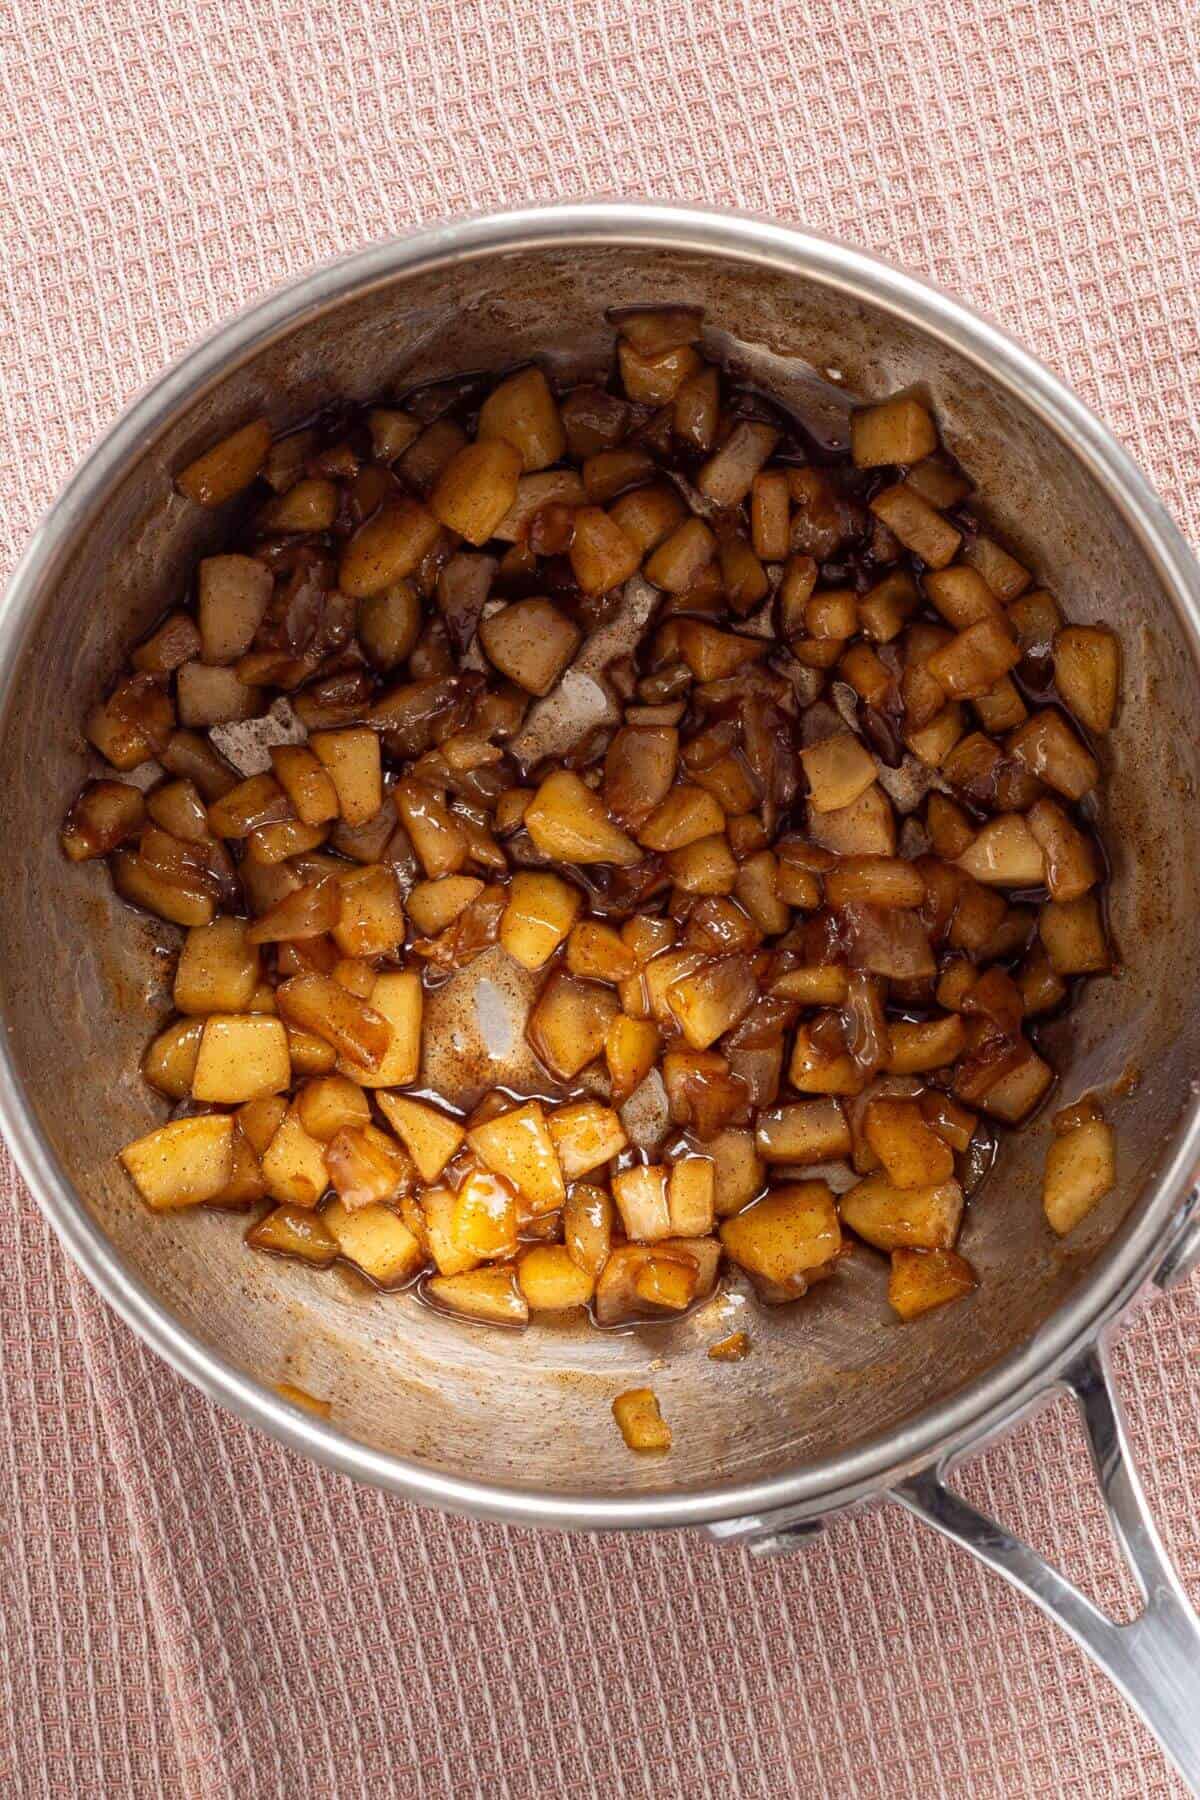 Cooked diced apples with cinnamon in a stainless steel pan on a textured tablecloth.